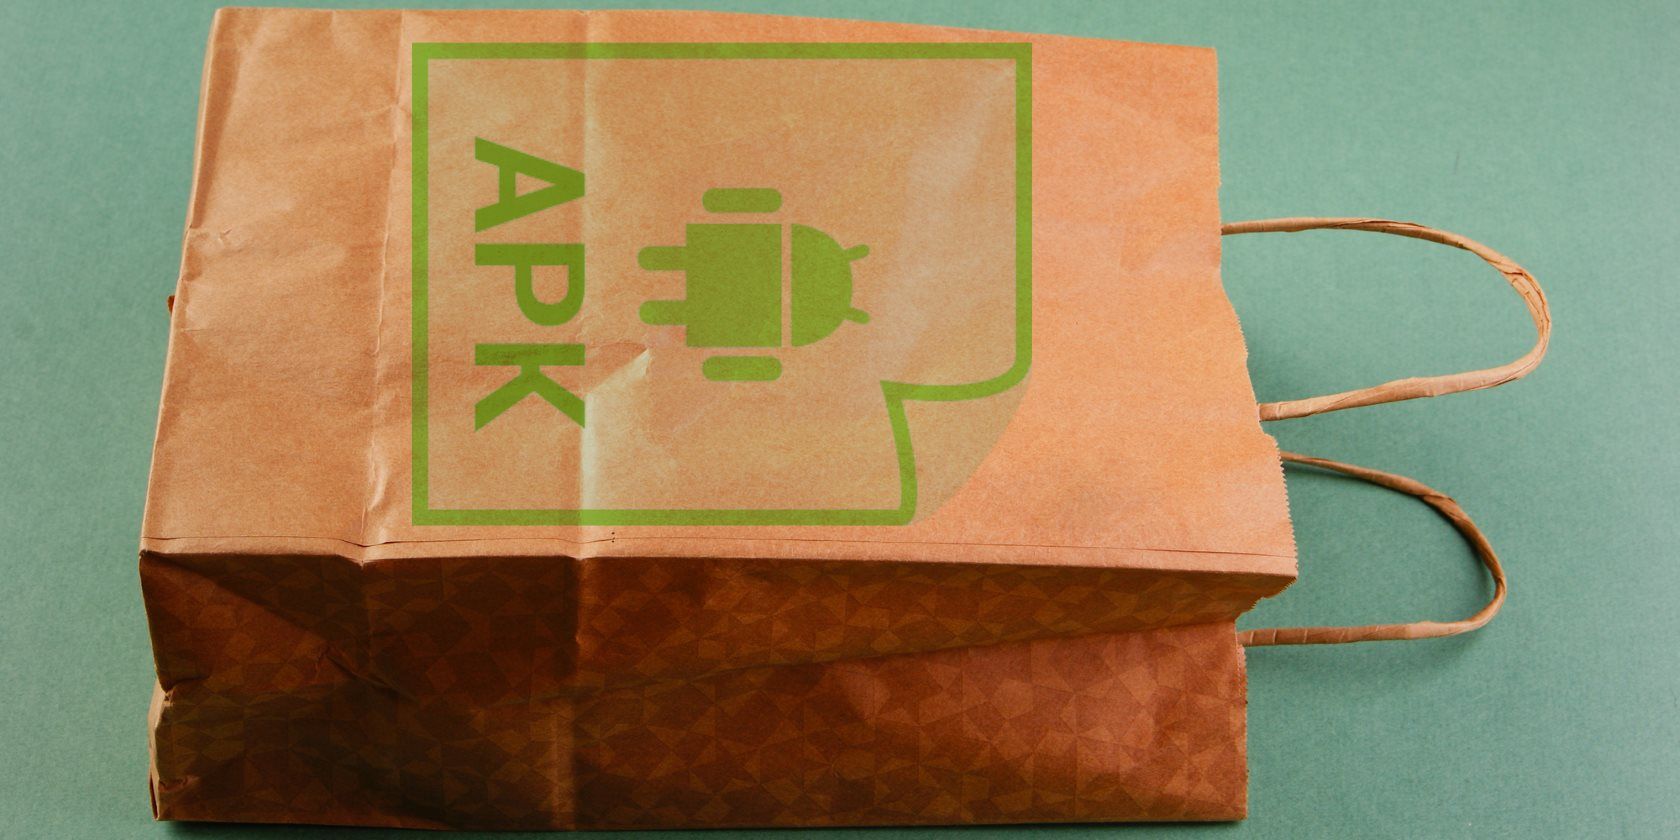 Paper bag with the Android logo and APK written on it